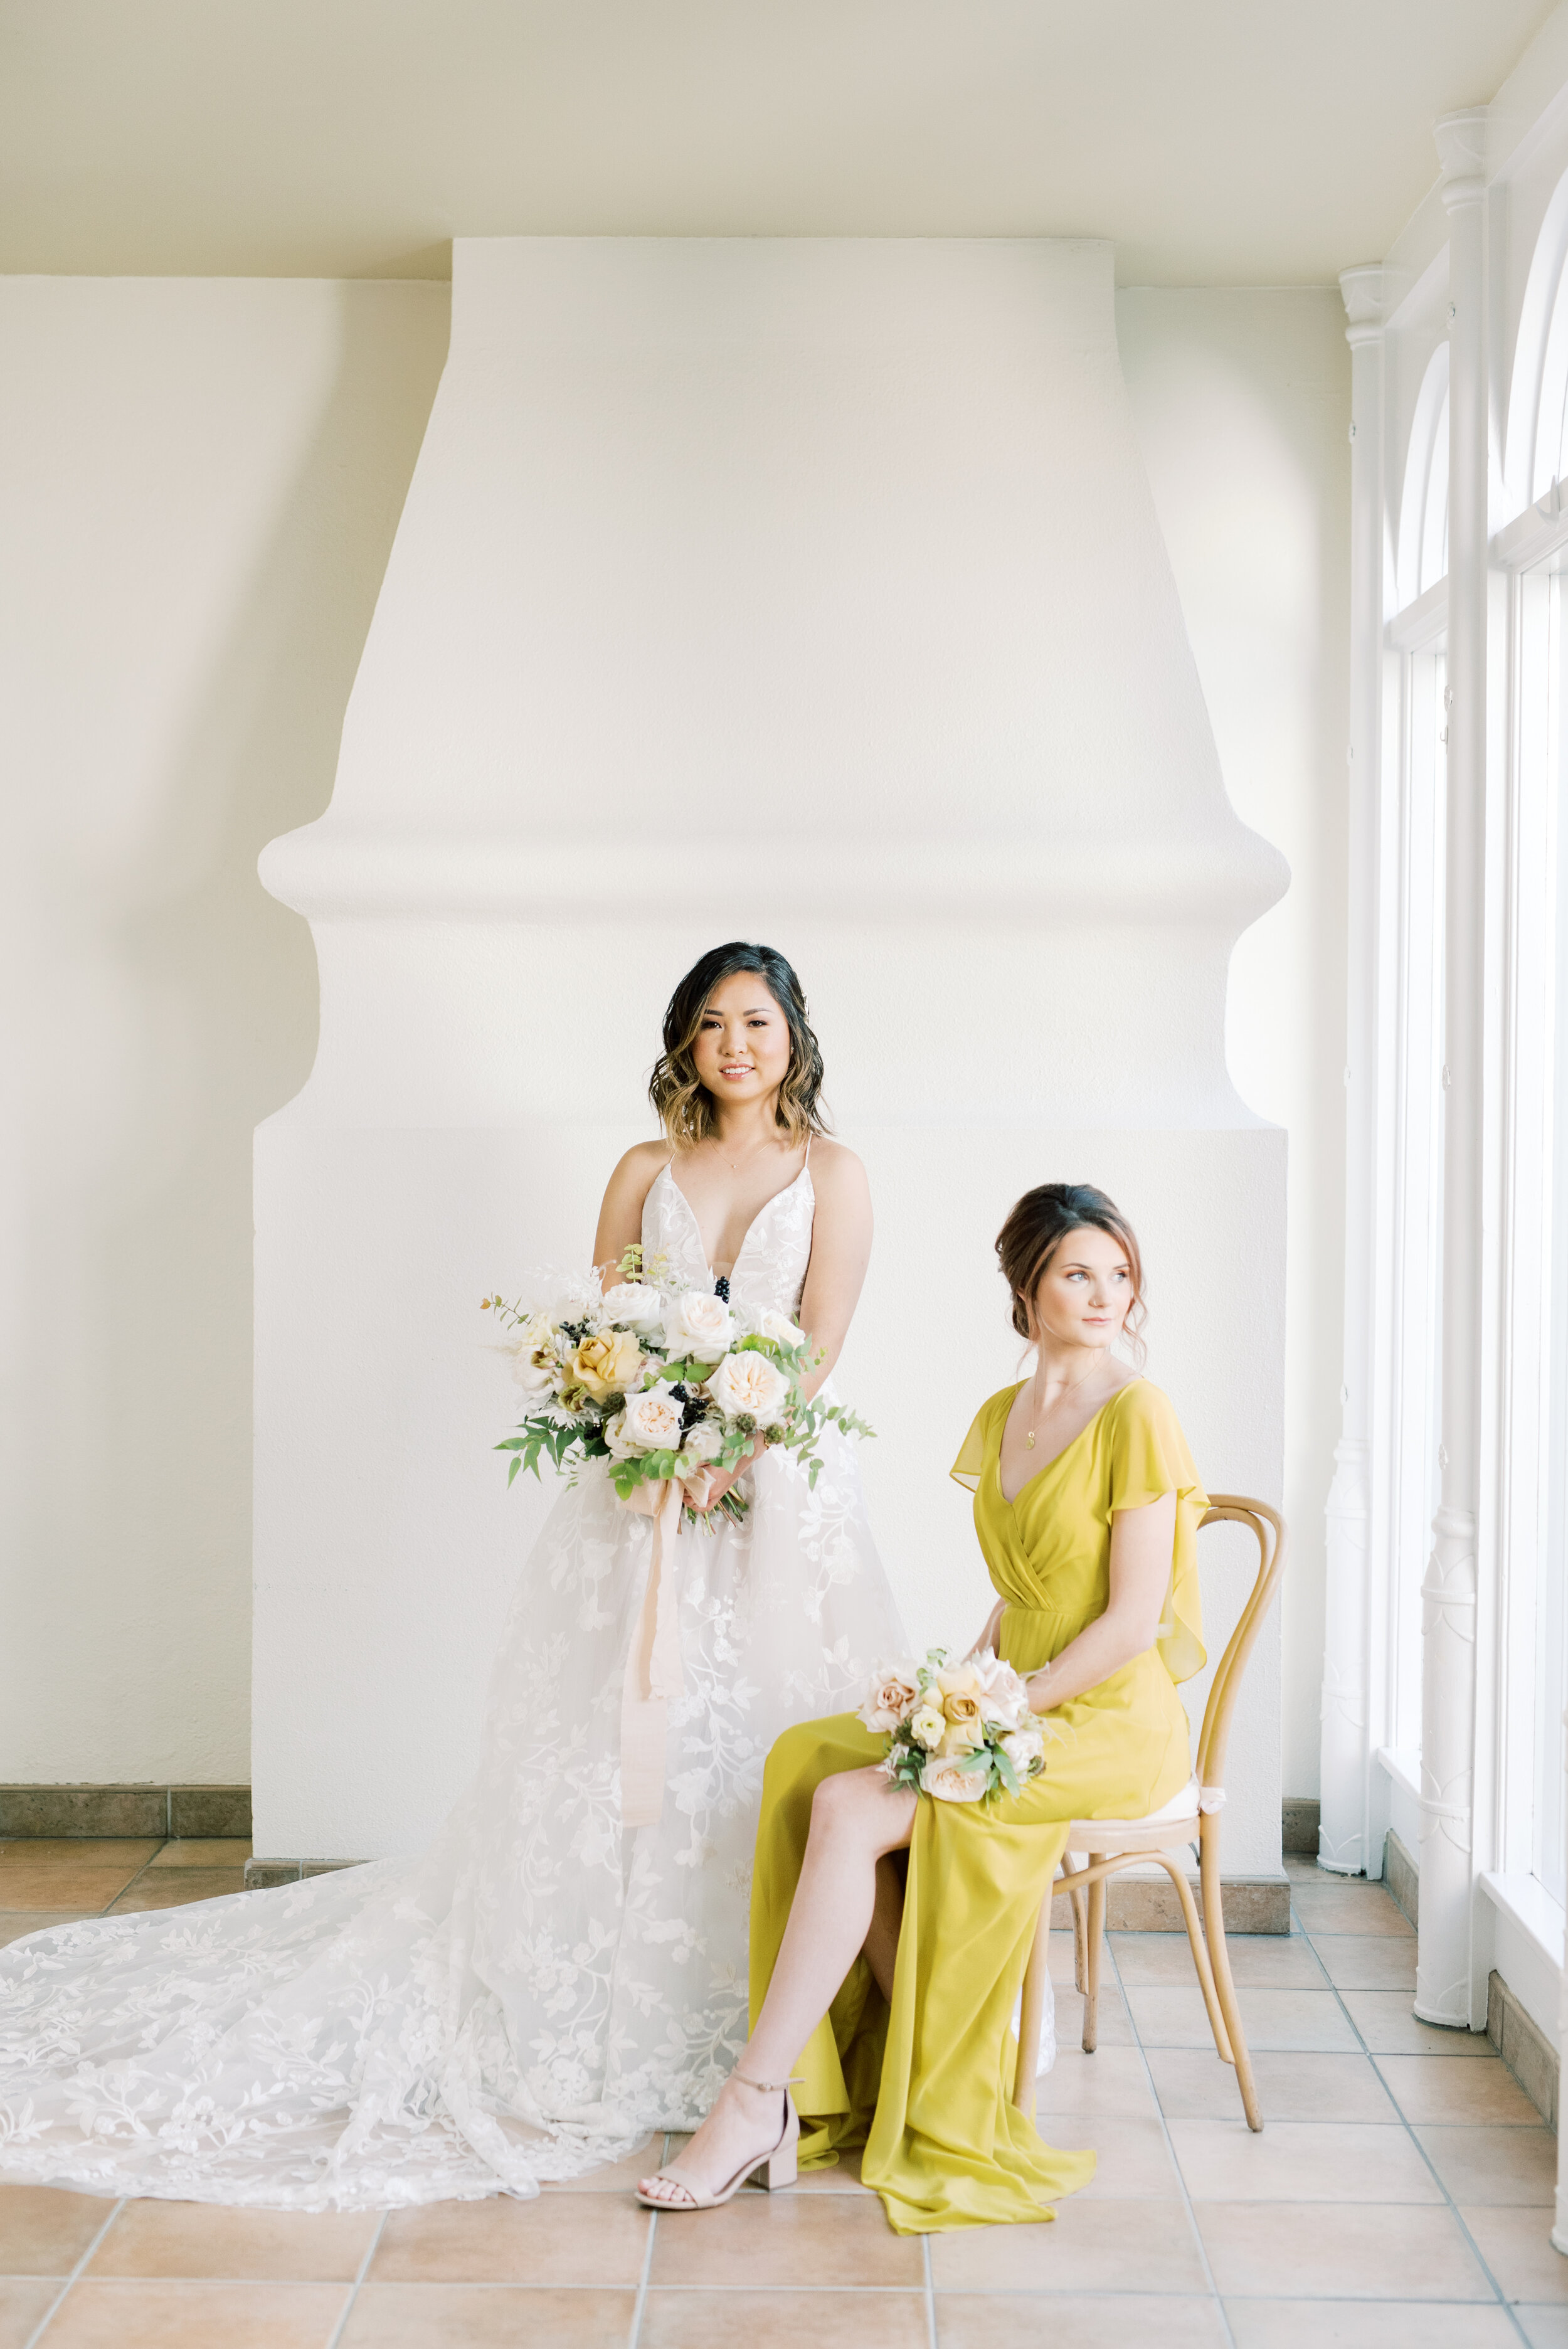 This late autumn wedding inspiration took place at the lovely Philadelphia Wedding Venue, Pomme Rador. Featuring the fine art style of Haley Richter photography and a romantic color palette.